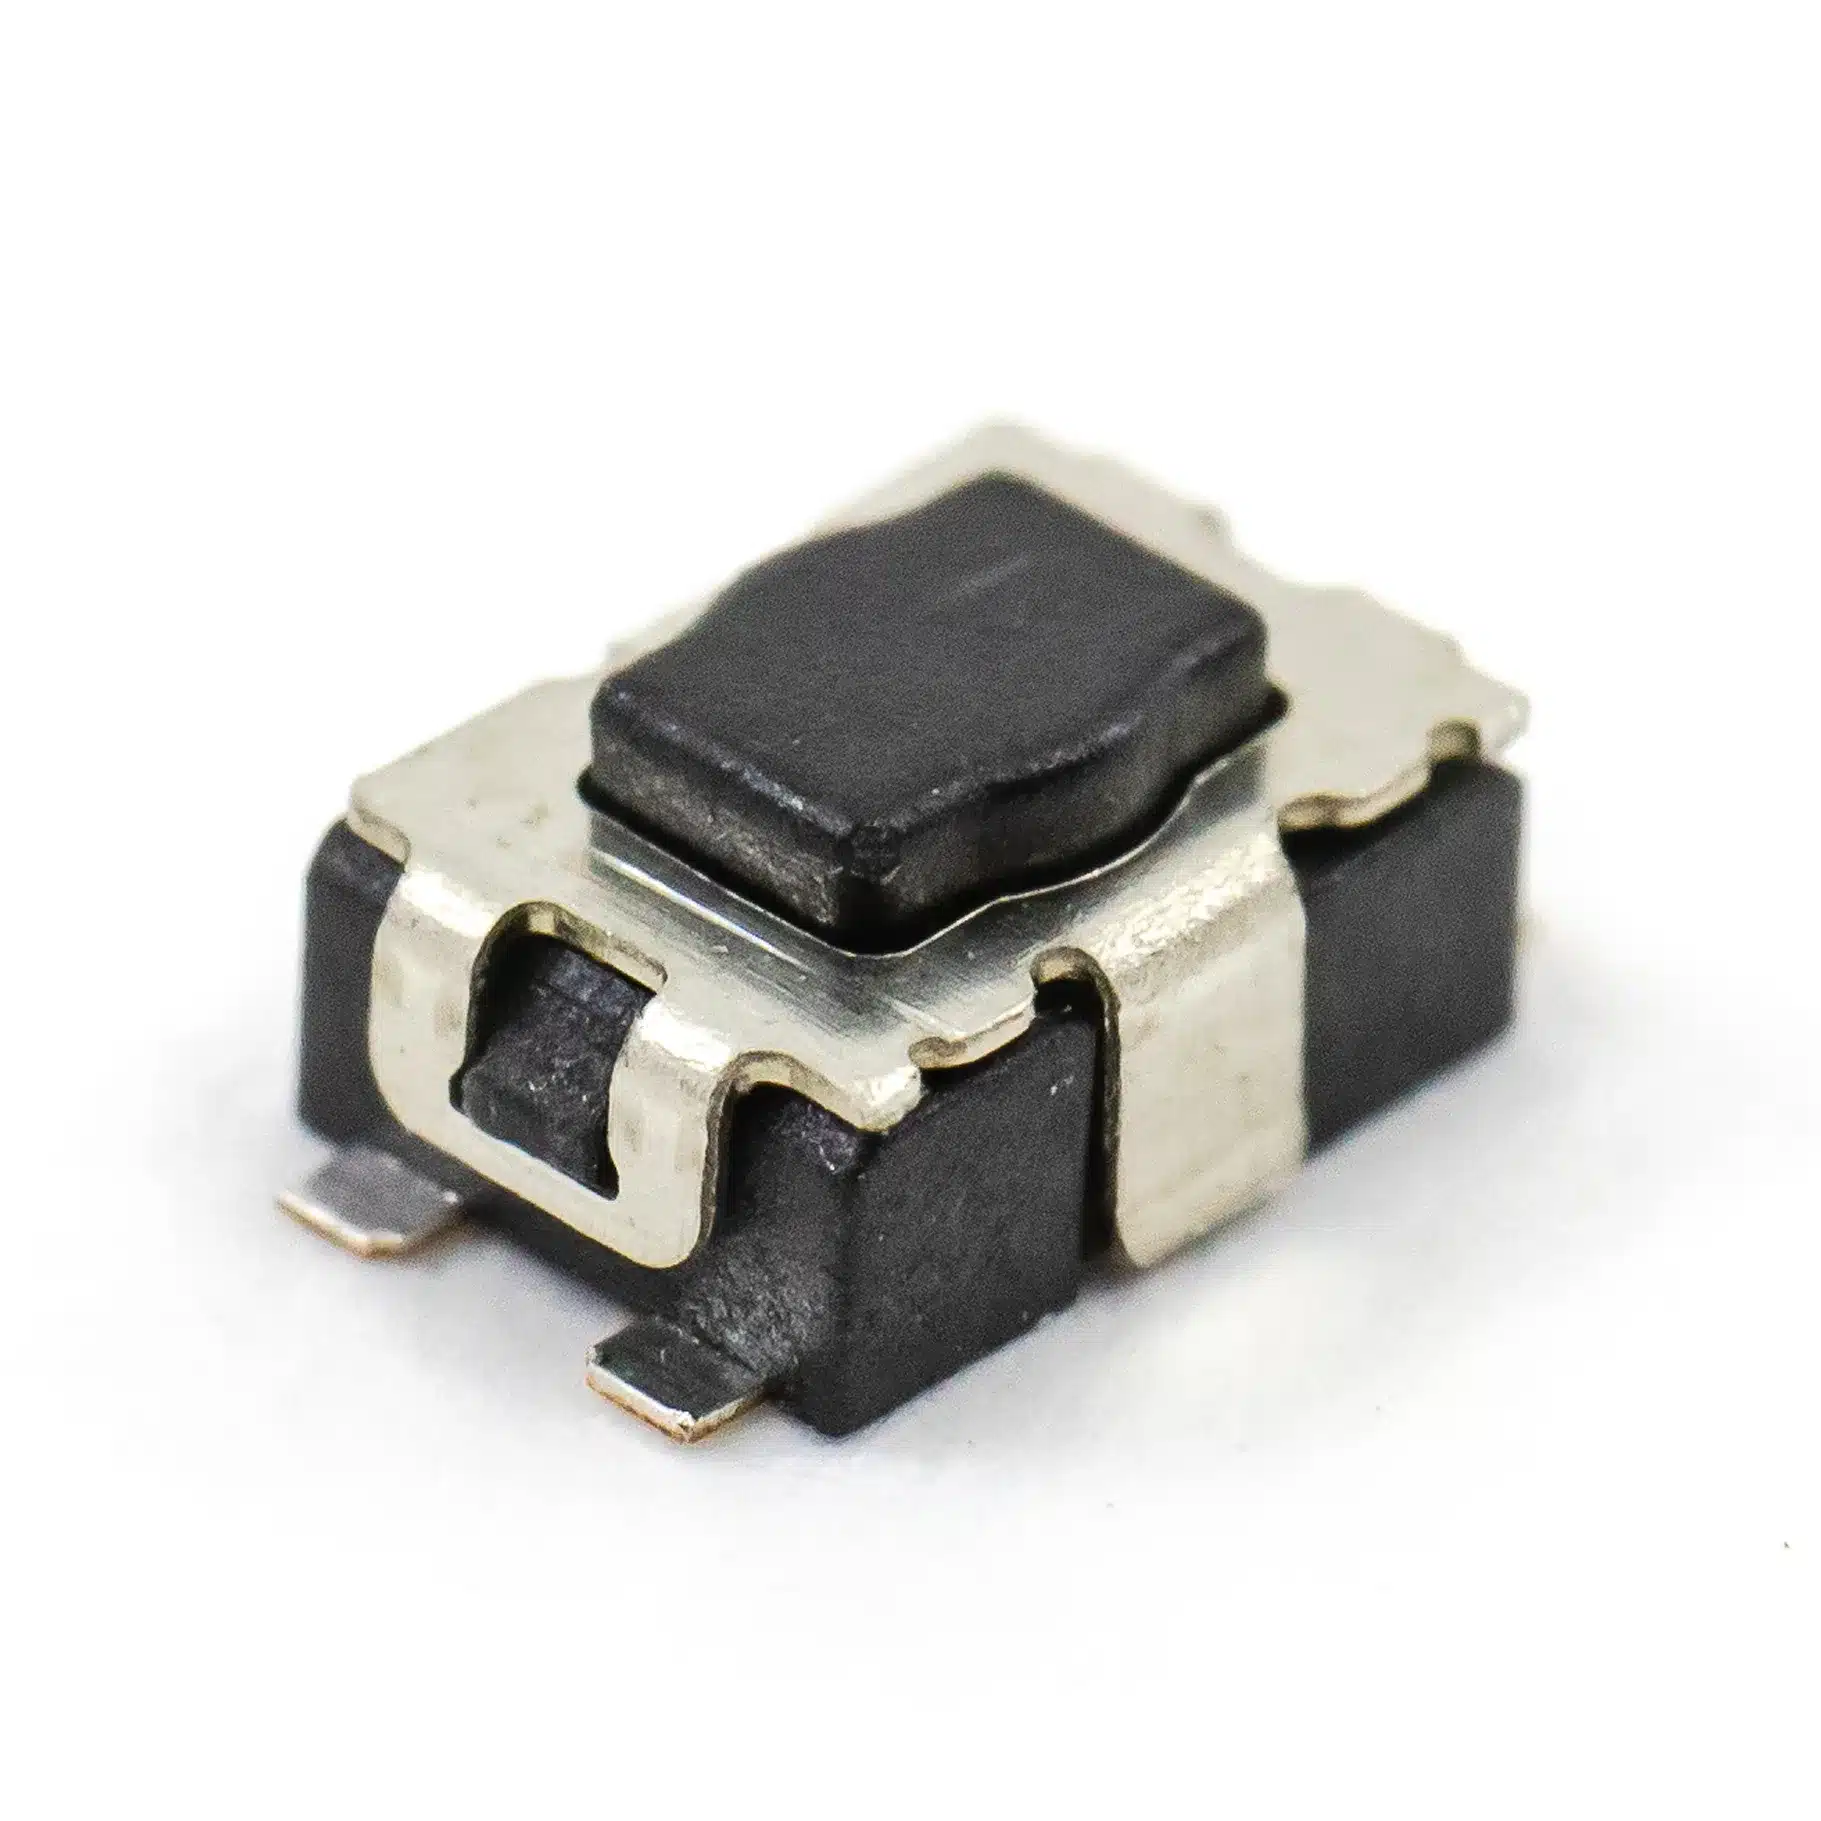 Best miniature switches: TL6330 Series